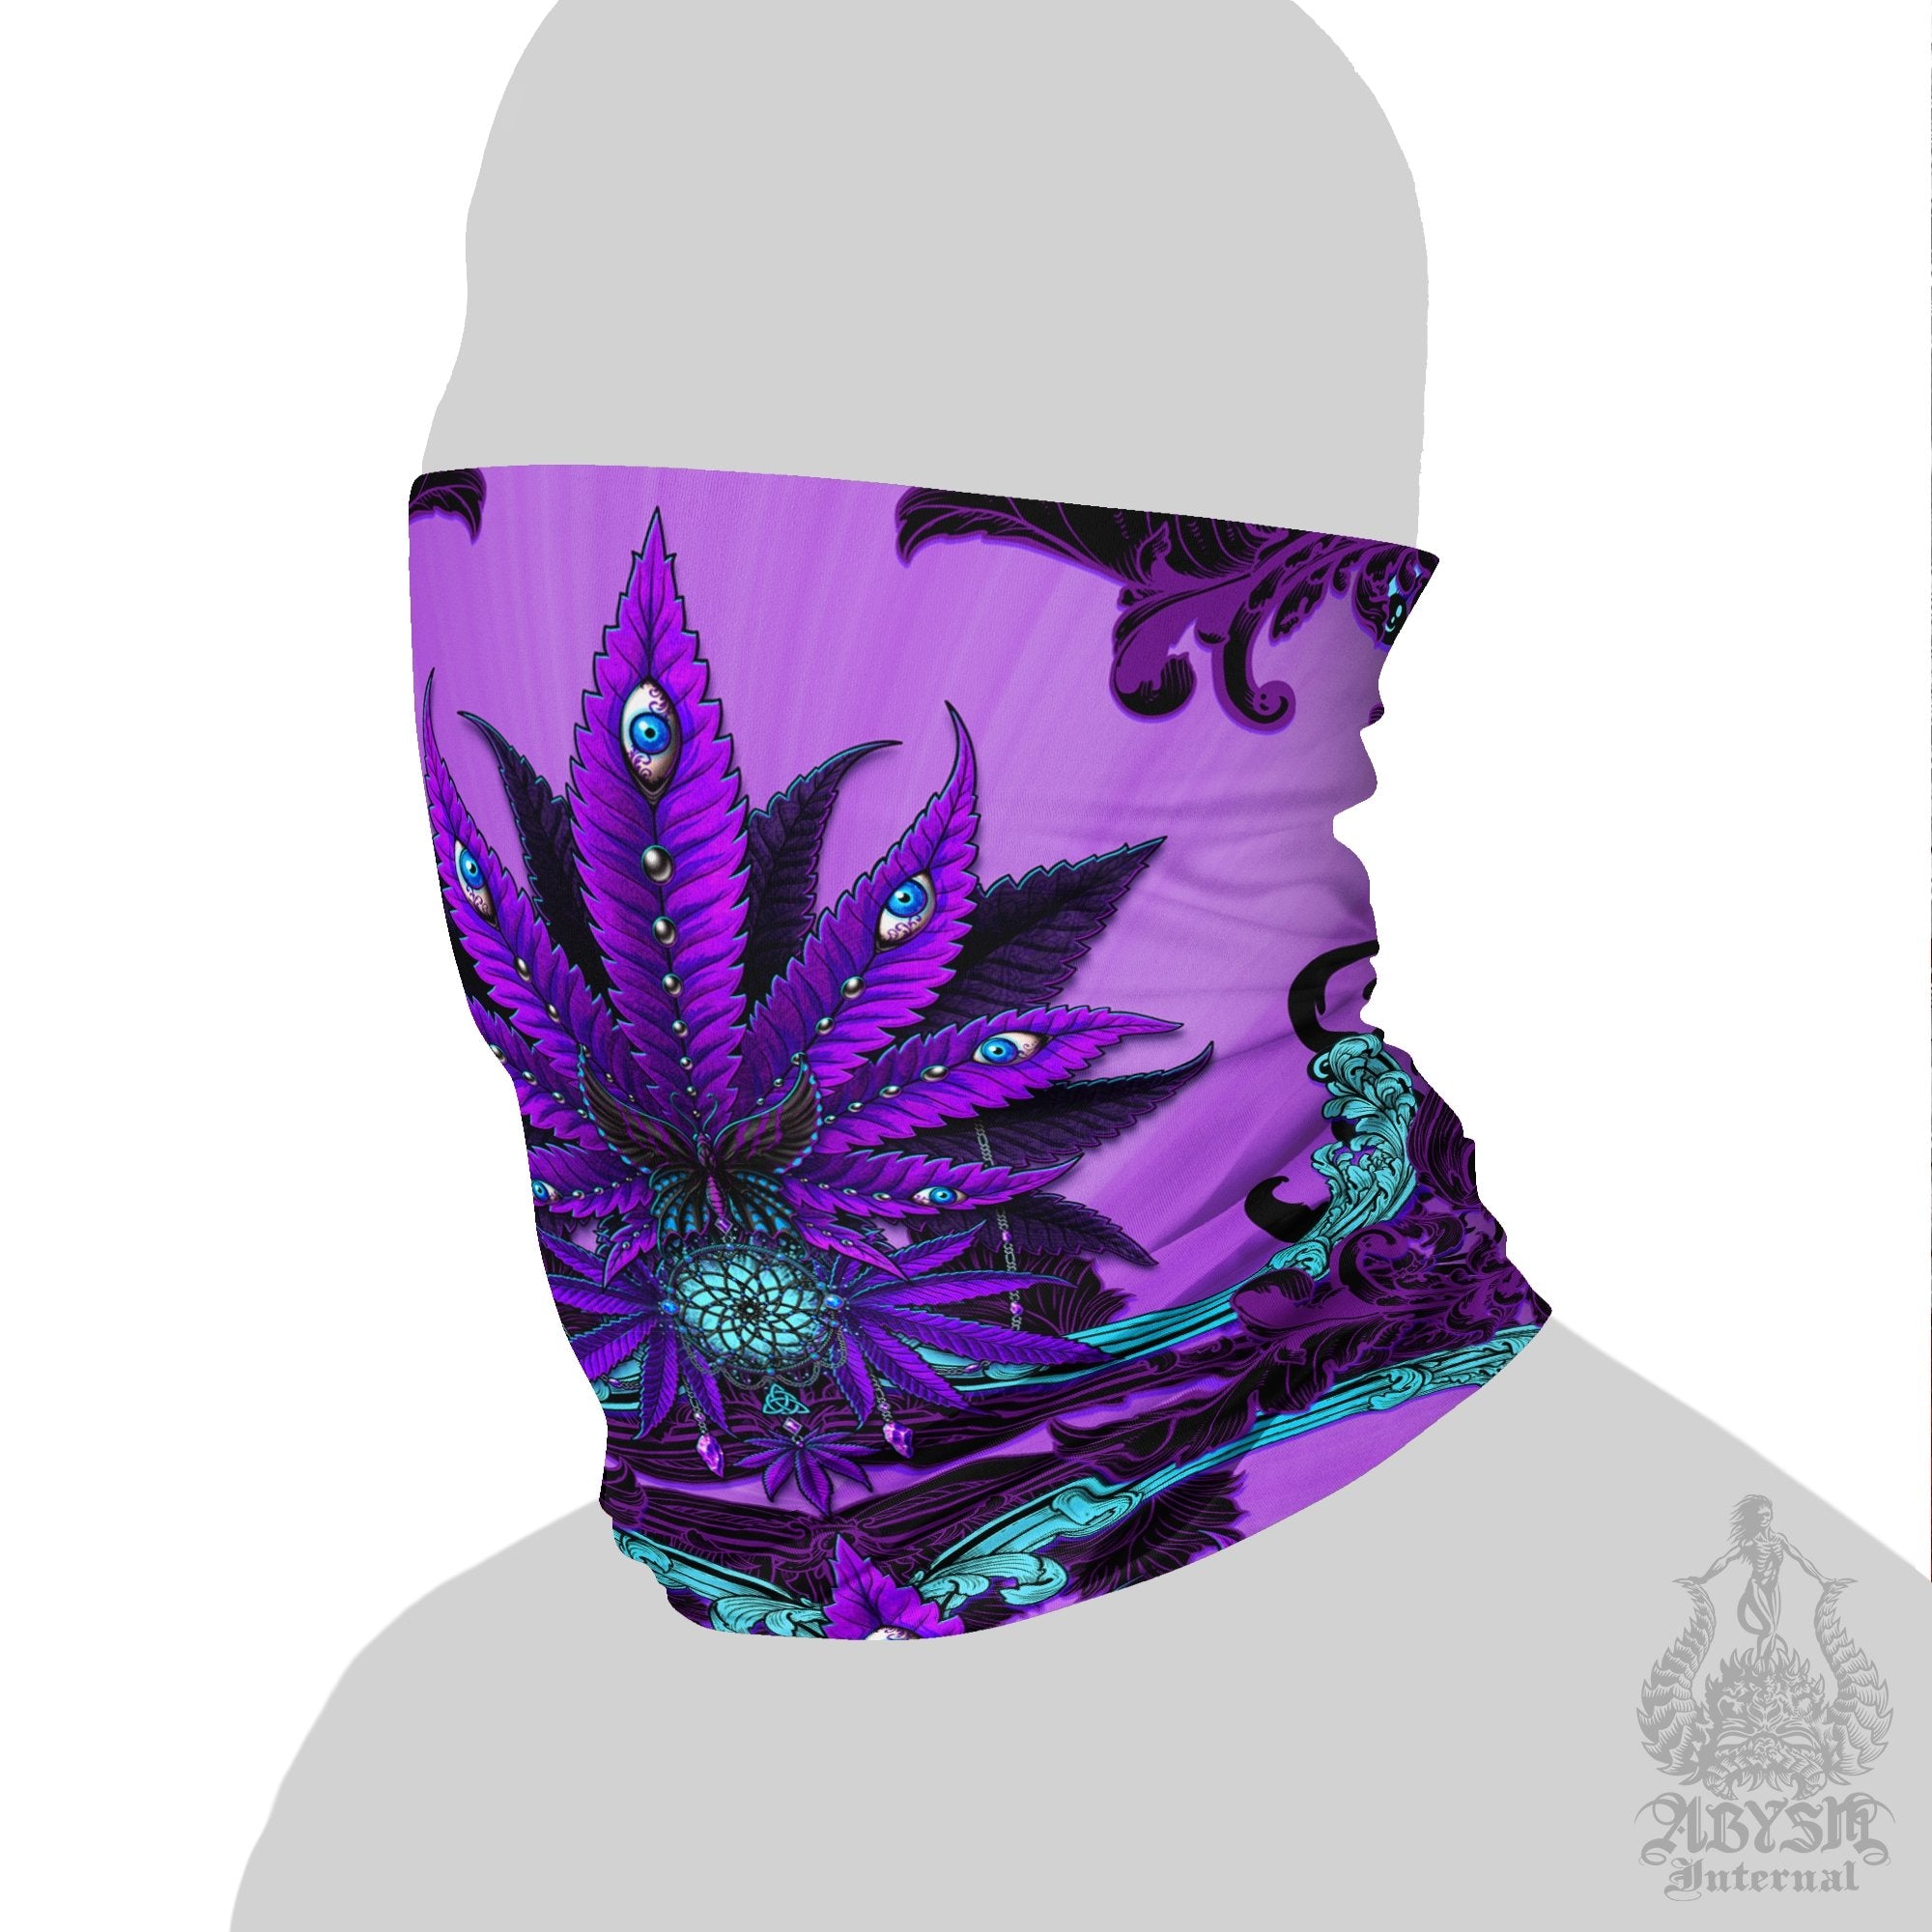 Weed Neck Gaiter, Cannabis Face Mask, Pastel Goth Marijuana Head Covering, Outdoors Festival Outfit, Heavy Metal Concert, 420 Gift - Purple Black - Abysm Internal